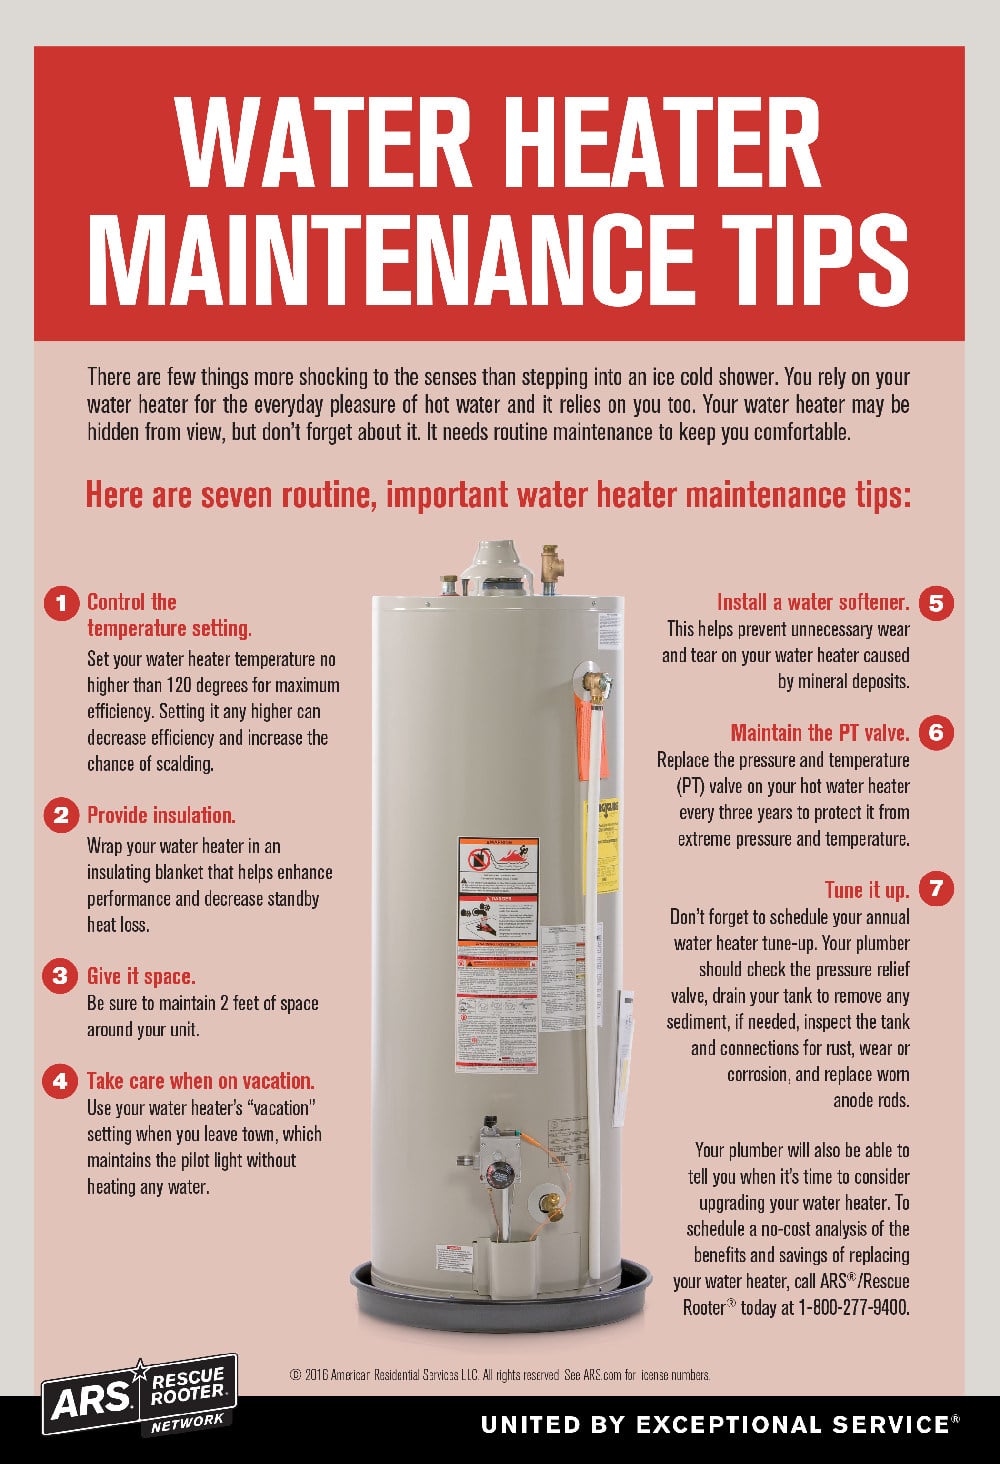 How to Adjust Your Water Heater's Temperature